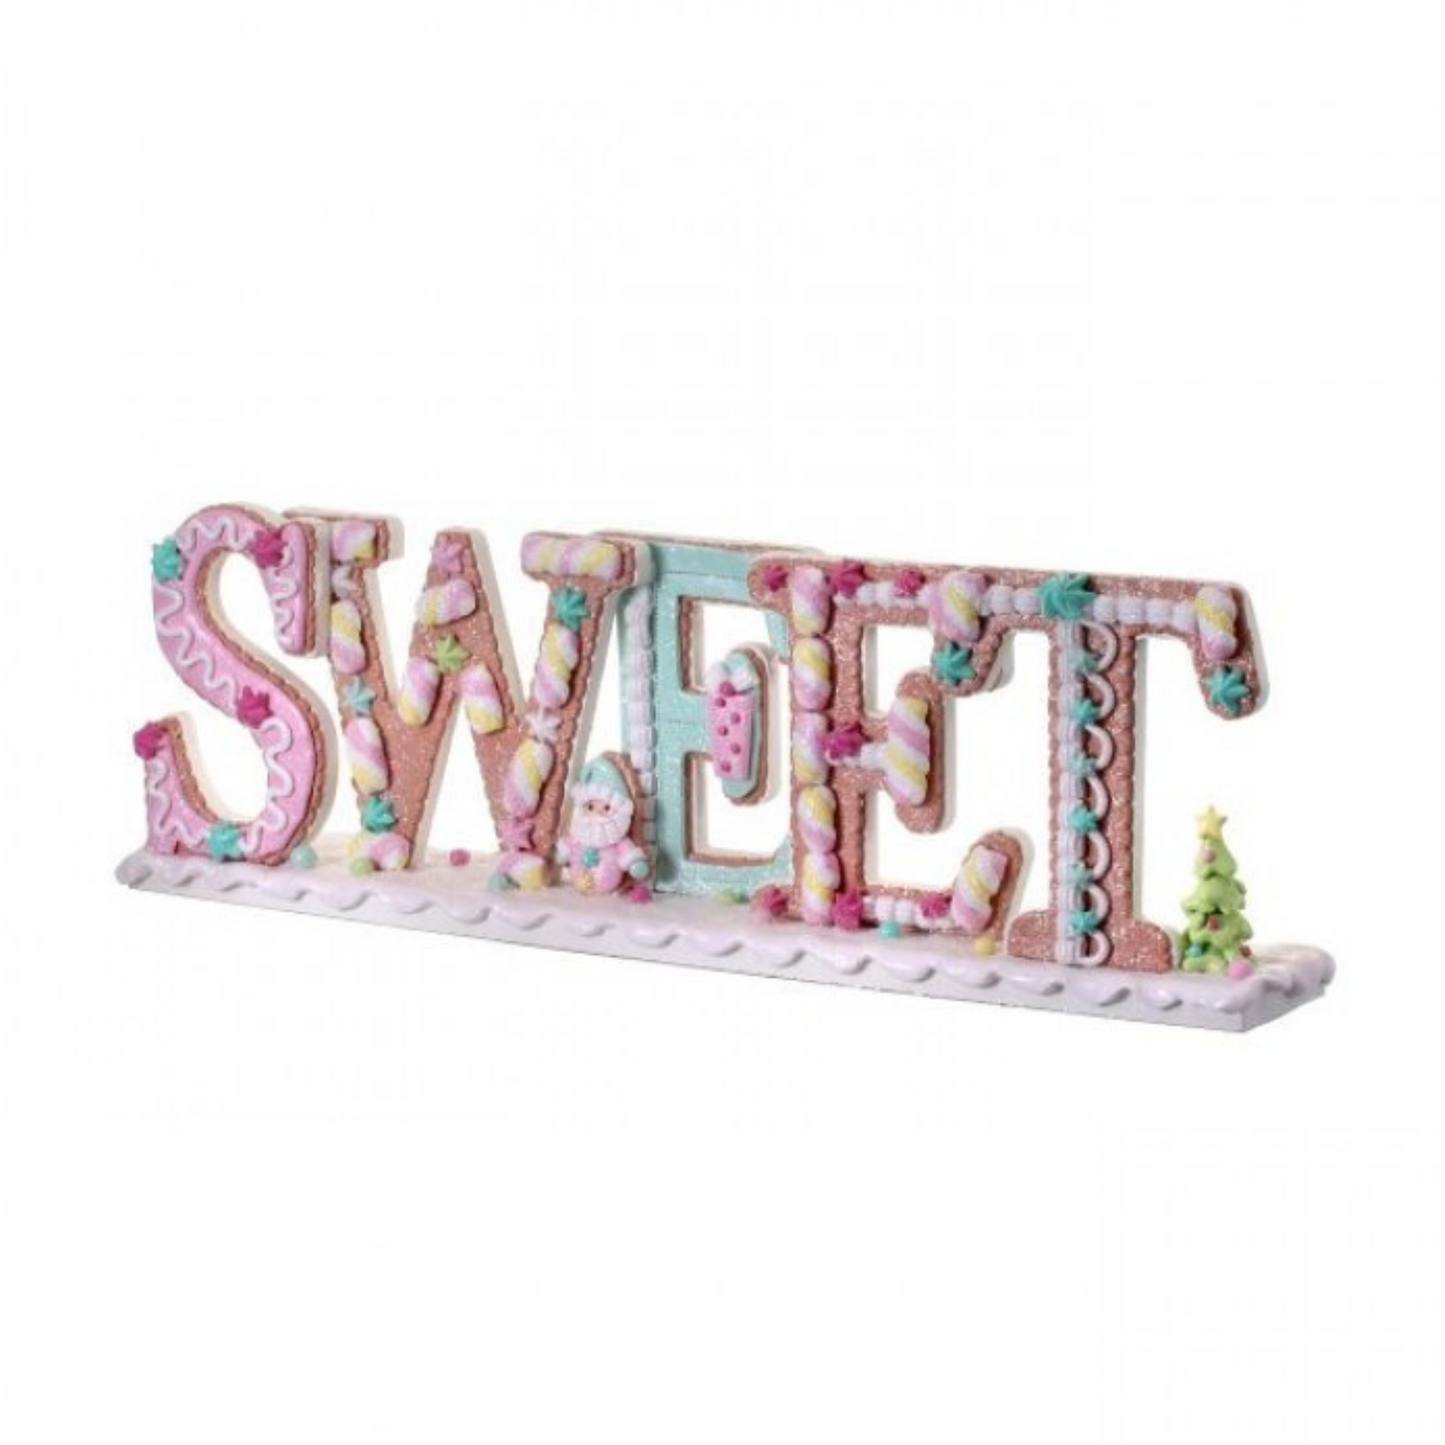 “Sweet” 20” Claydough Candy Table Piece